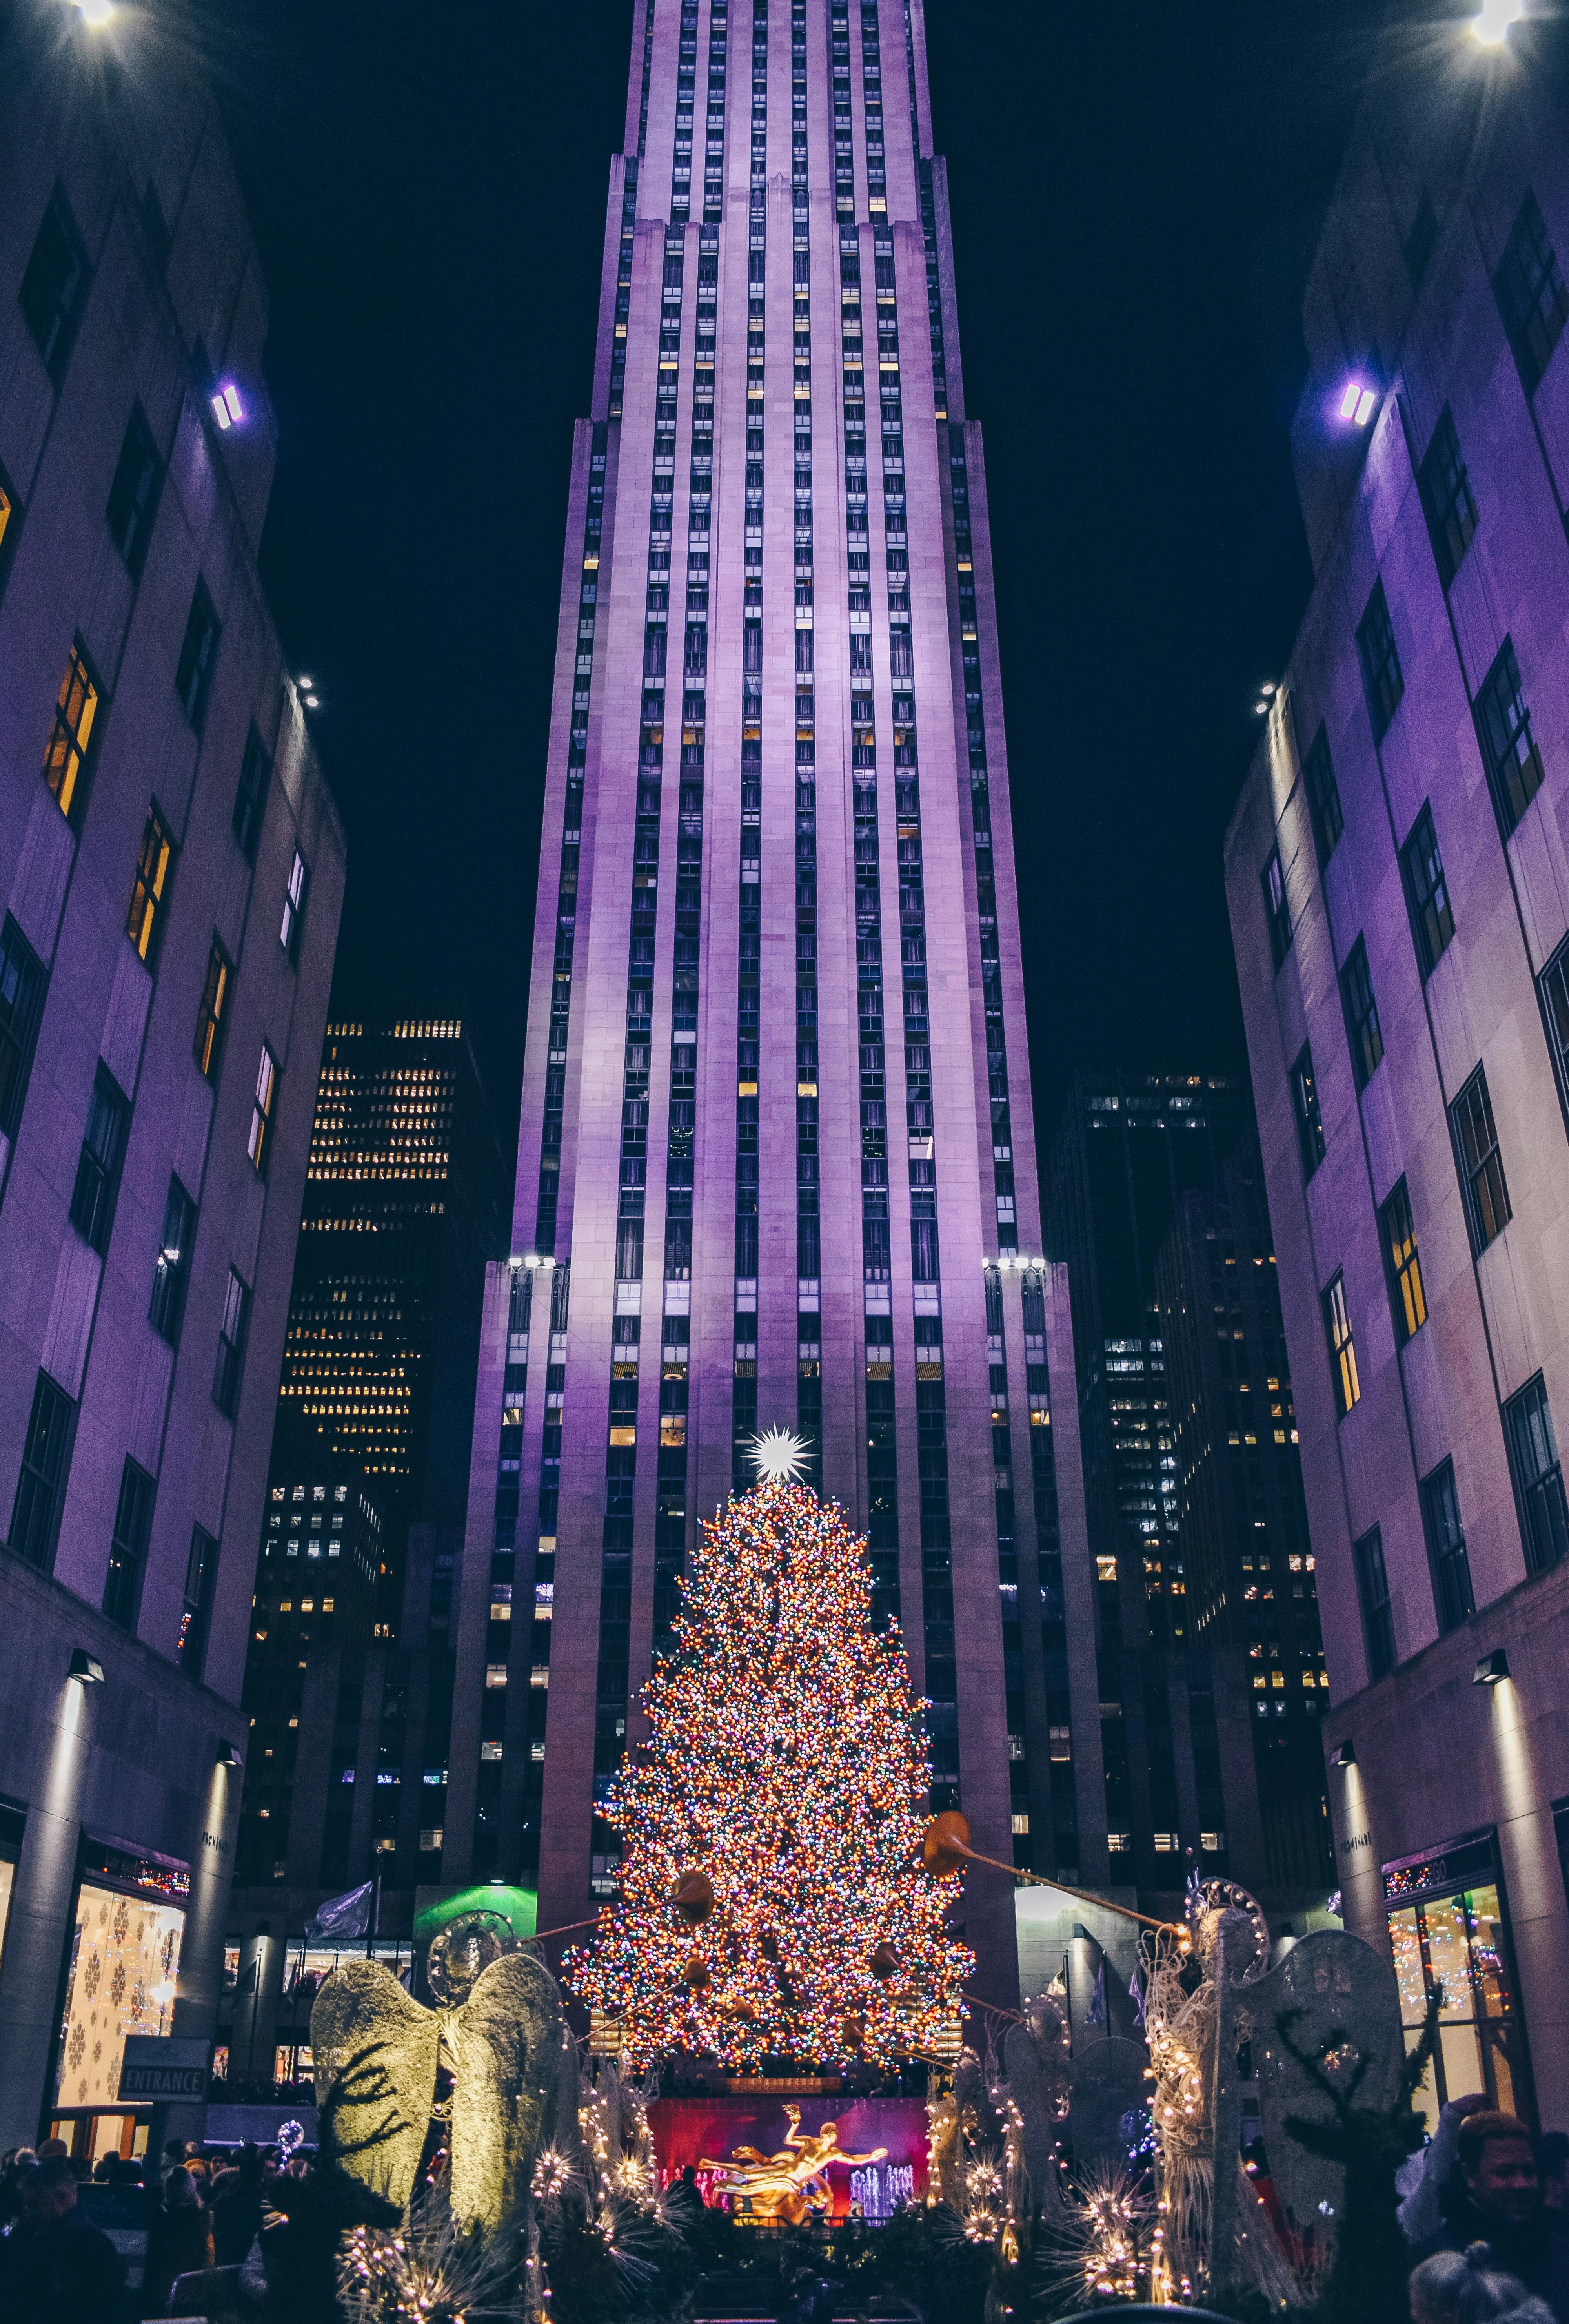 Rockefeller Center and its large Christmas tree.